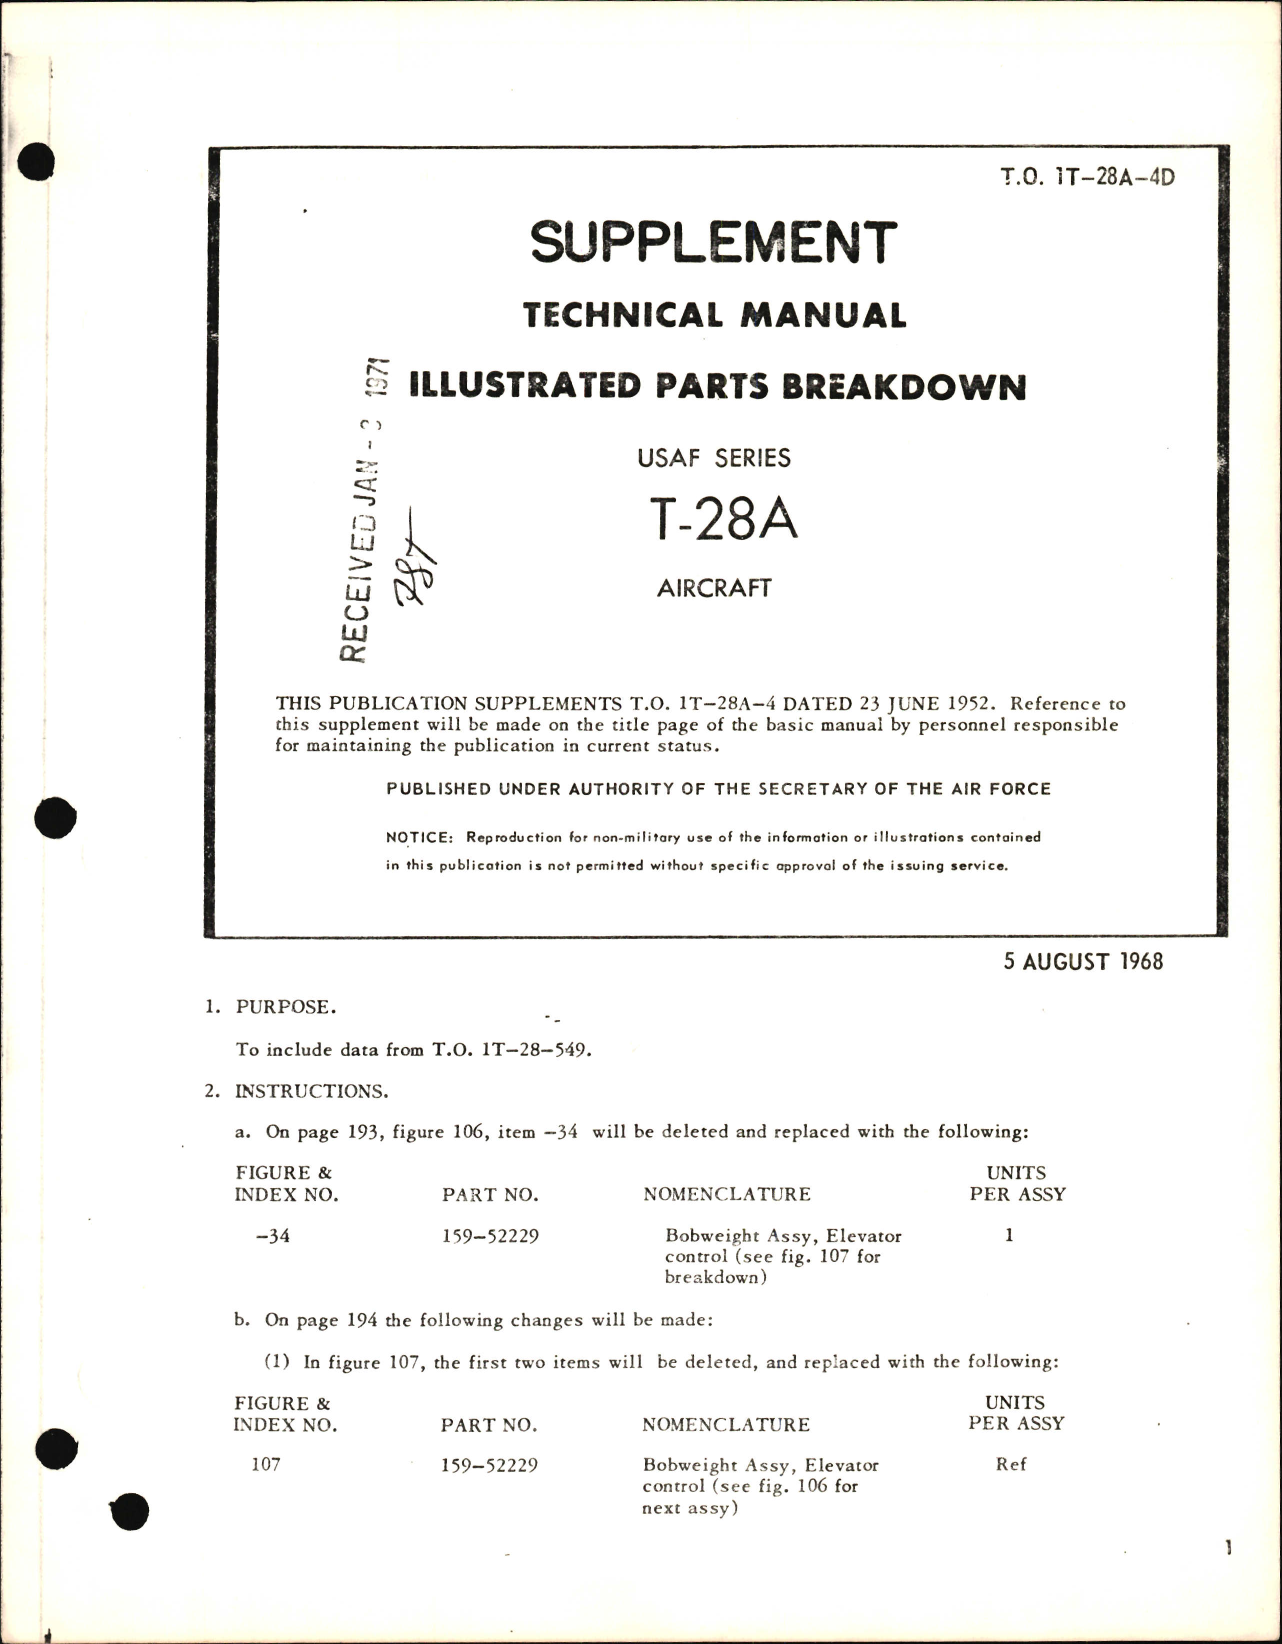 Sample page 1 from AirCorps Library document: Illustrated Parts Breakdown for T-28A - Supplement 